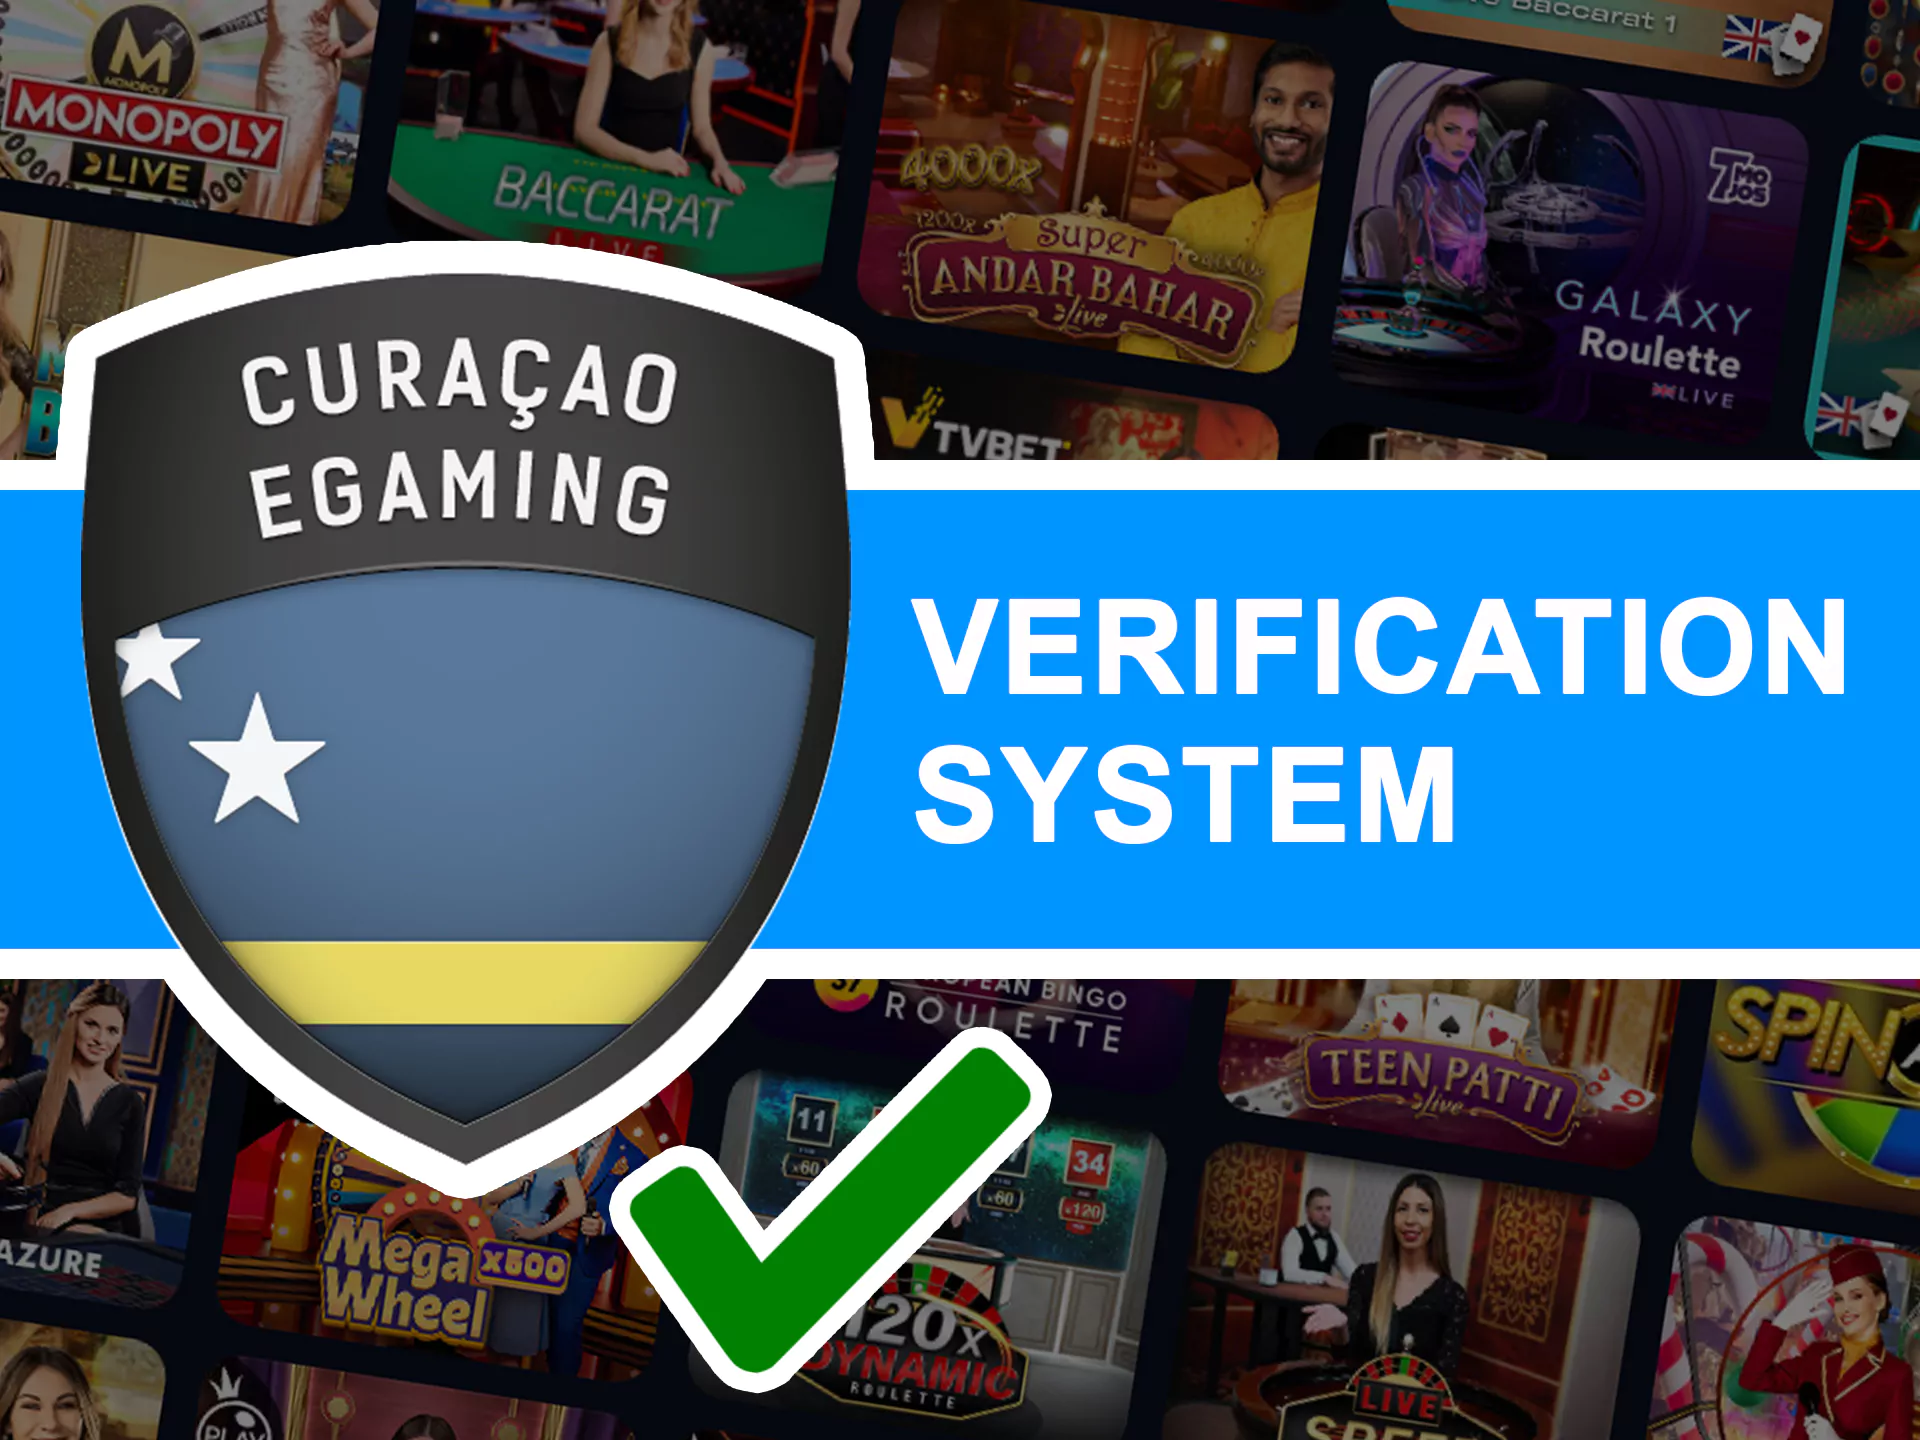 1win verification system working as well.